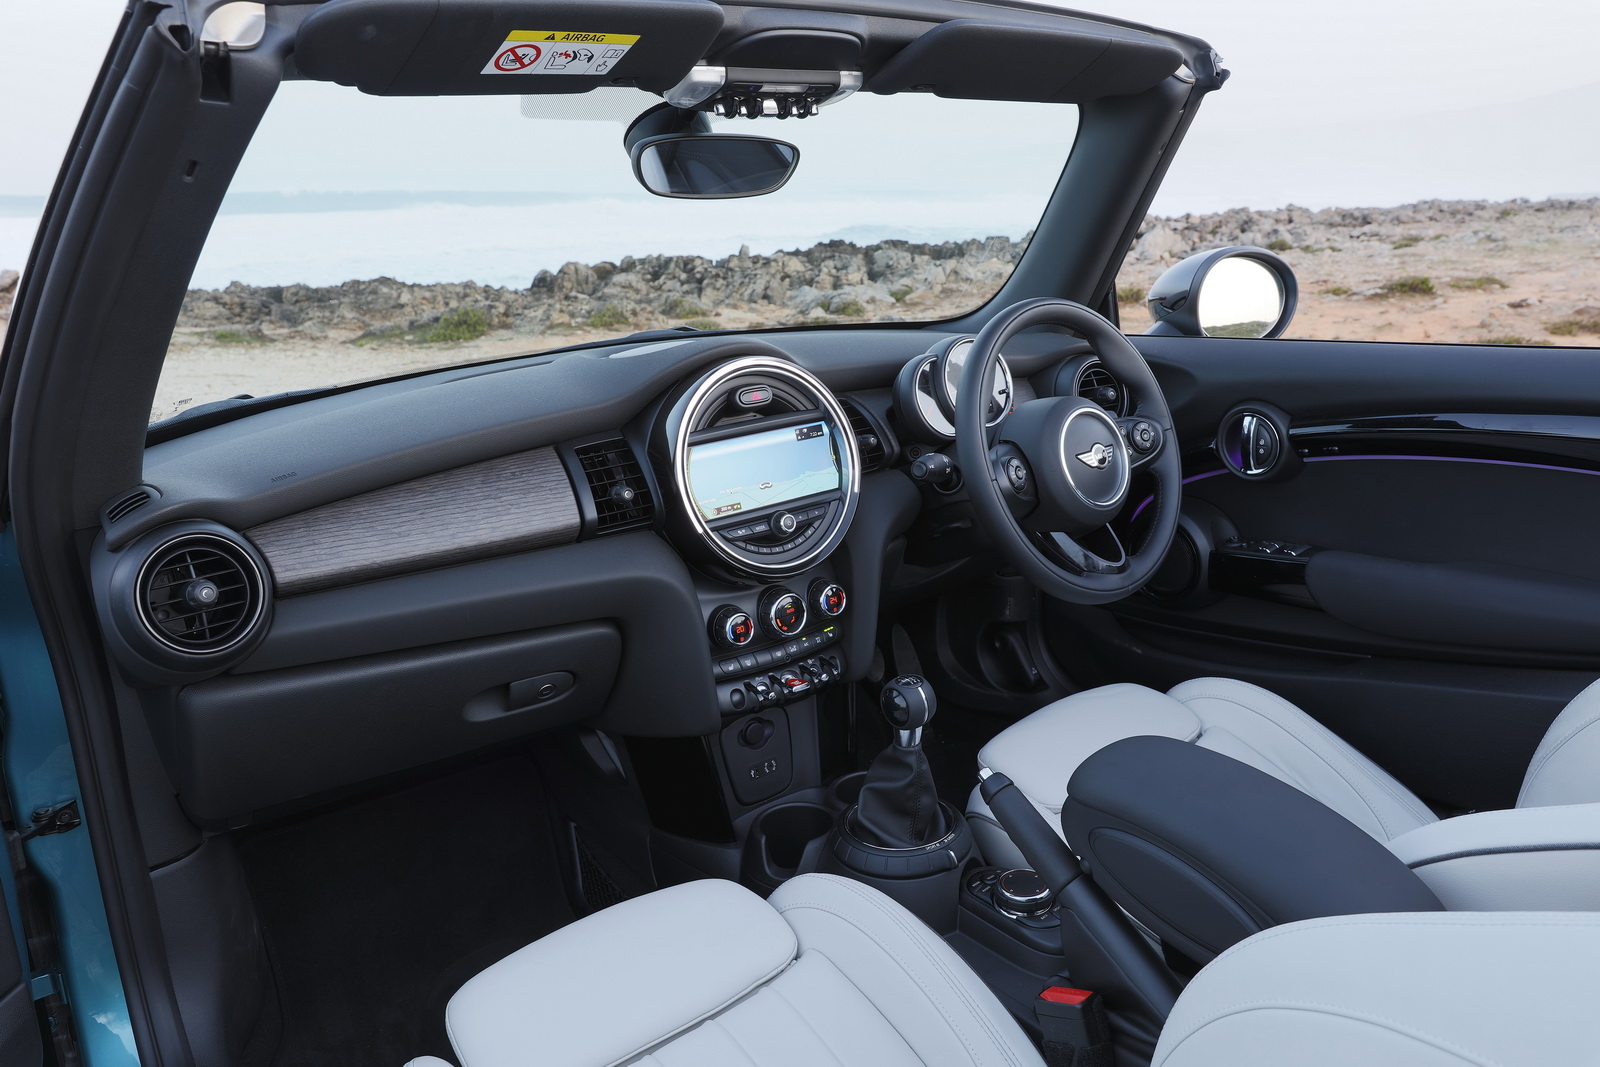 MINI Shows Off New Convertible In 169 Photos; Priced From £18,475 In ...